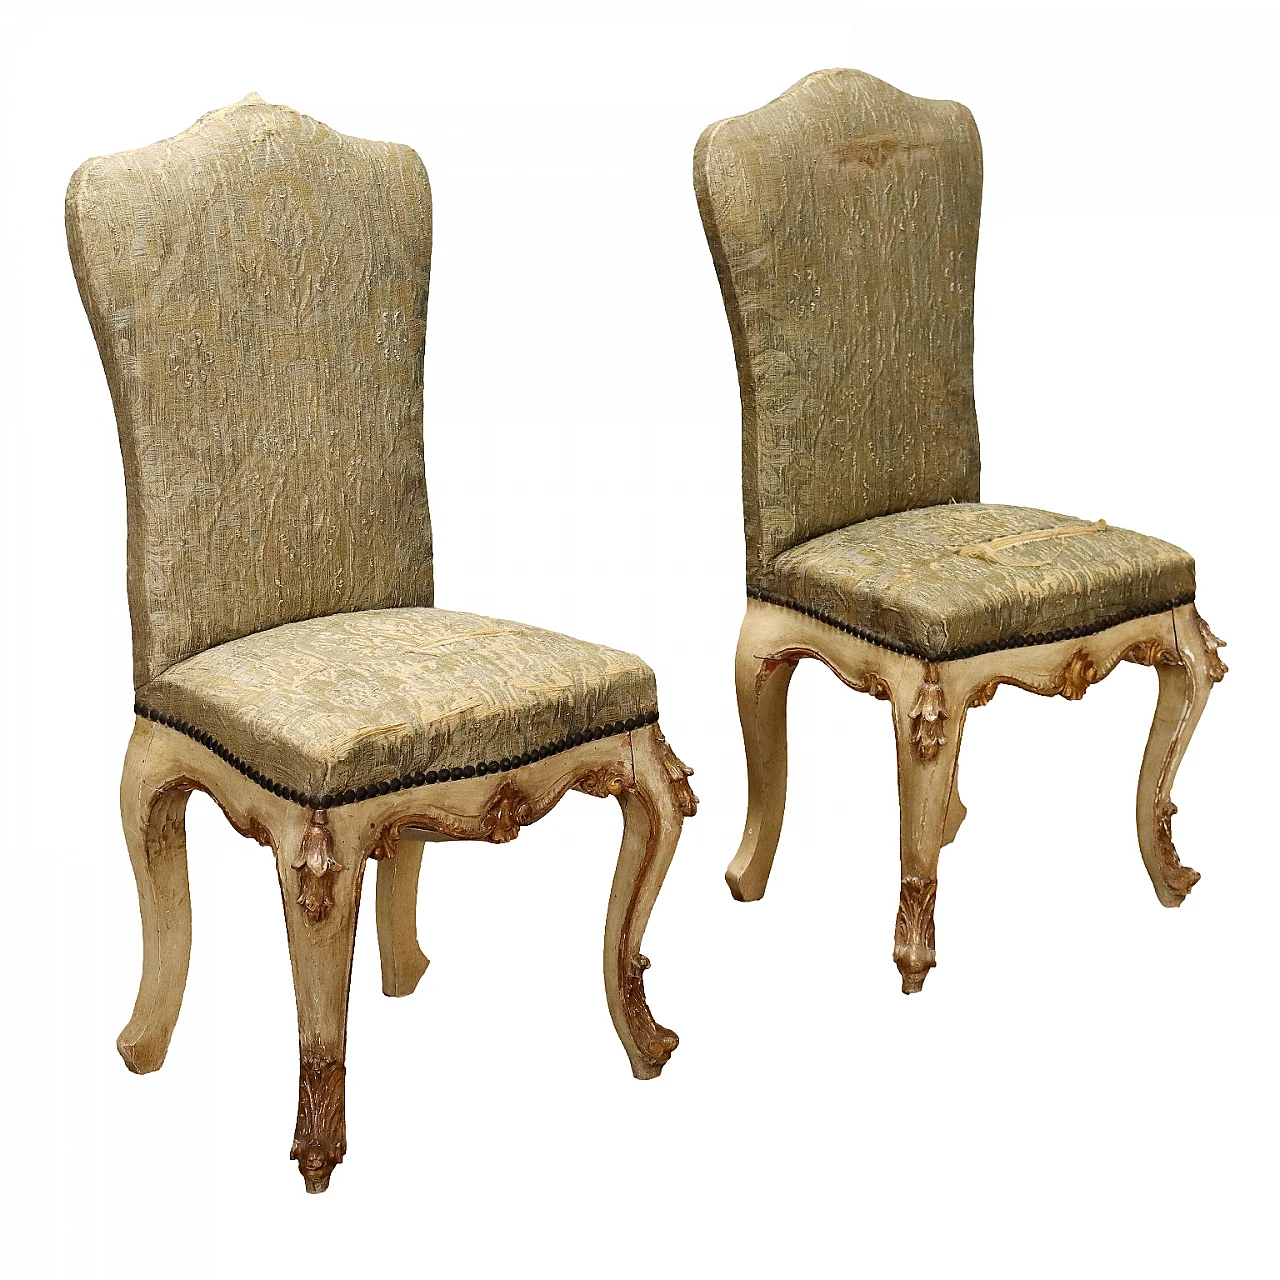 Pair of gilt chairs with leaf motifs & brocade fabric, 19th century 1